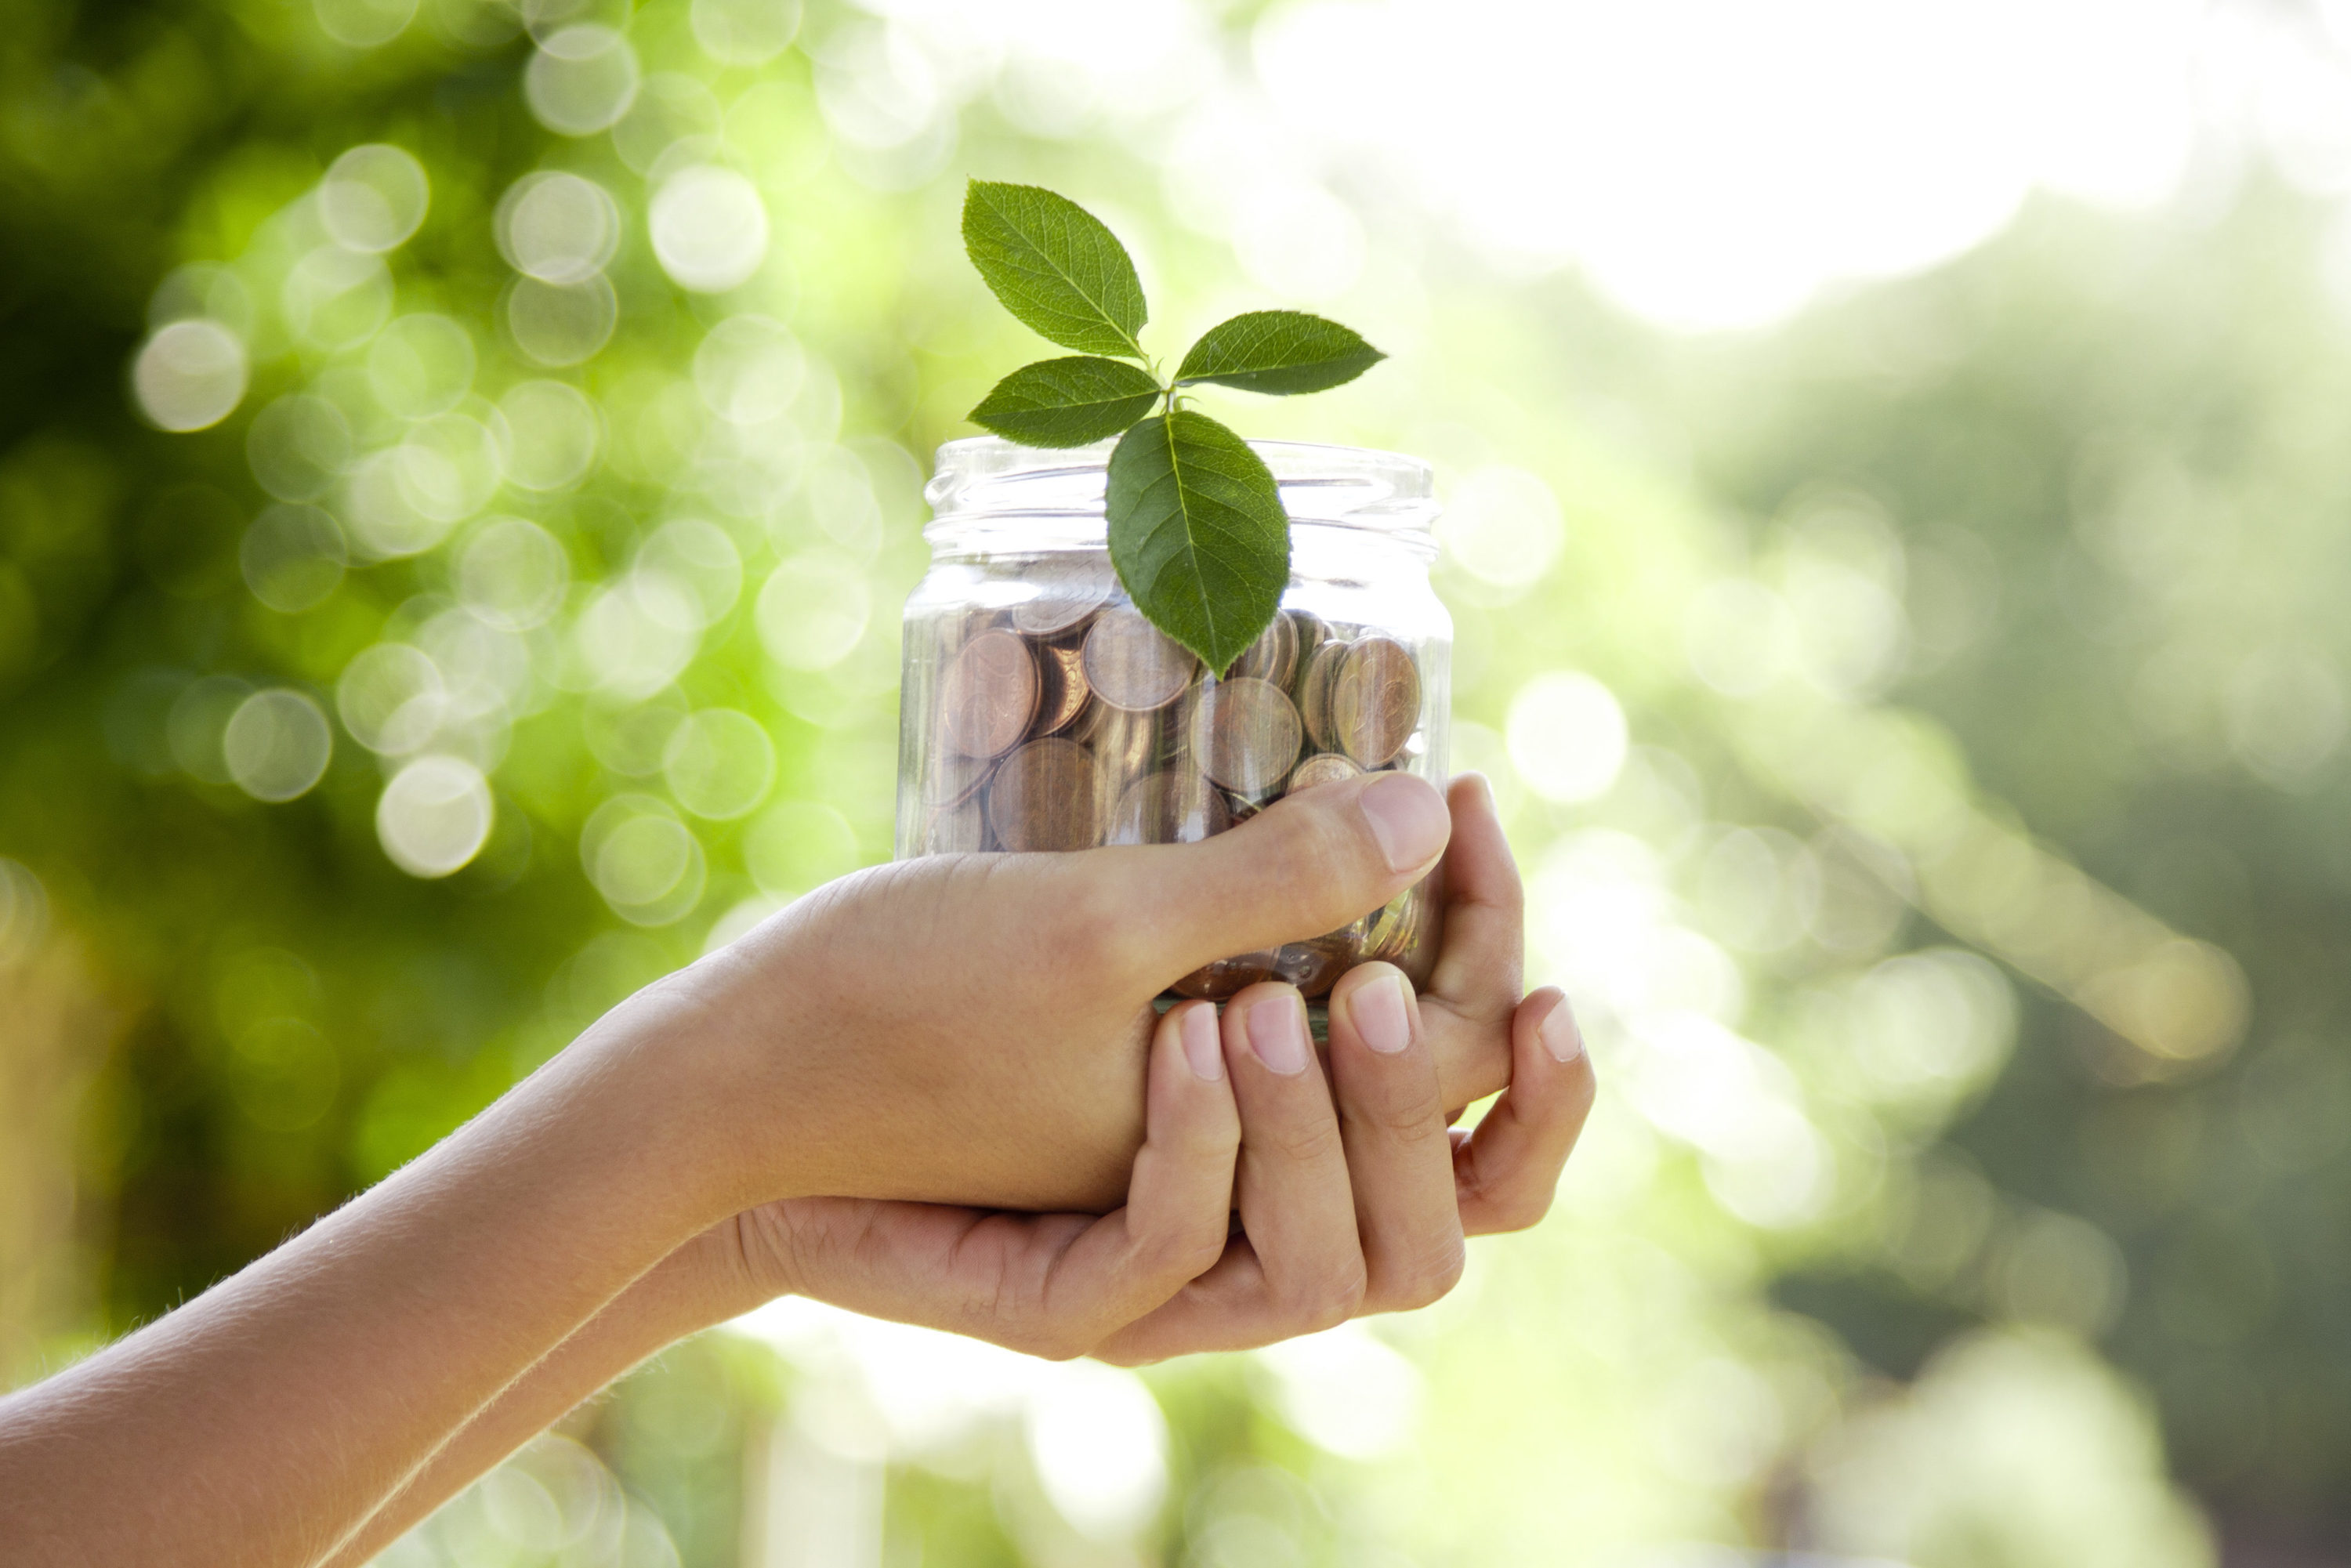 woman's hands holding jar of coins with green sprouting plant